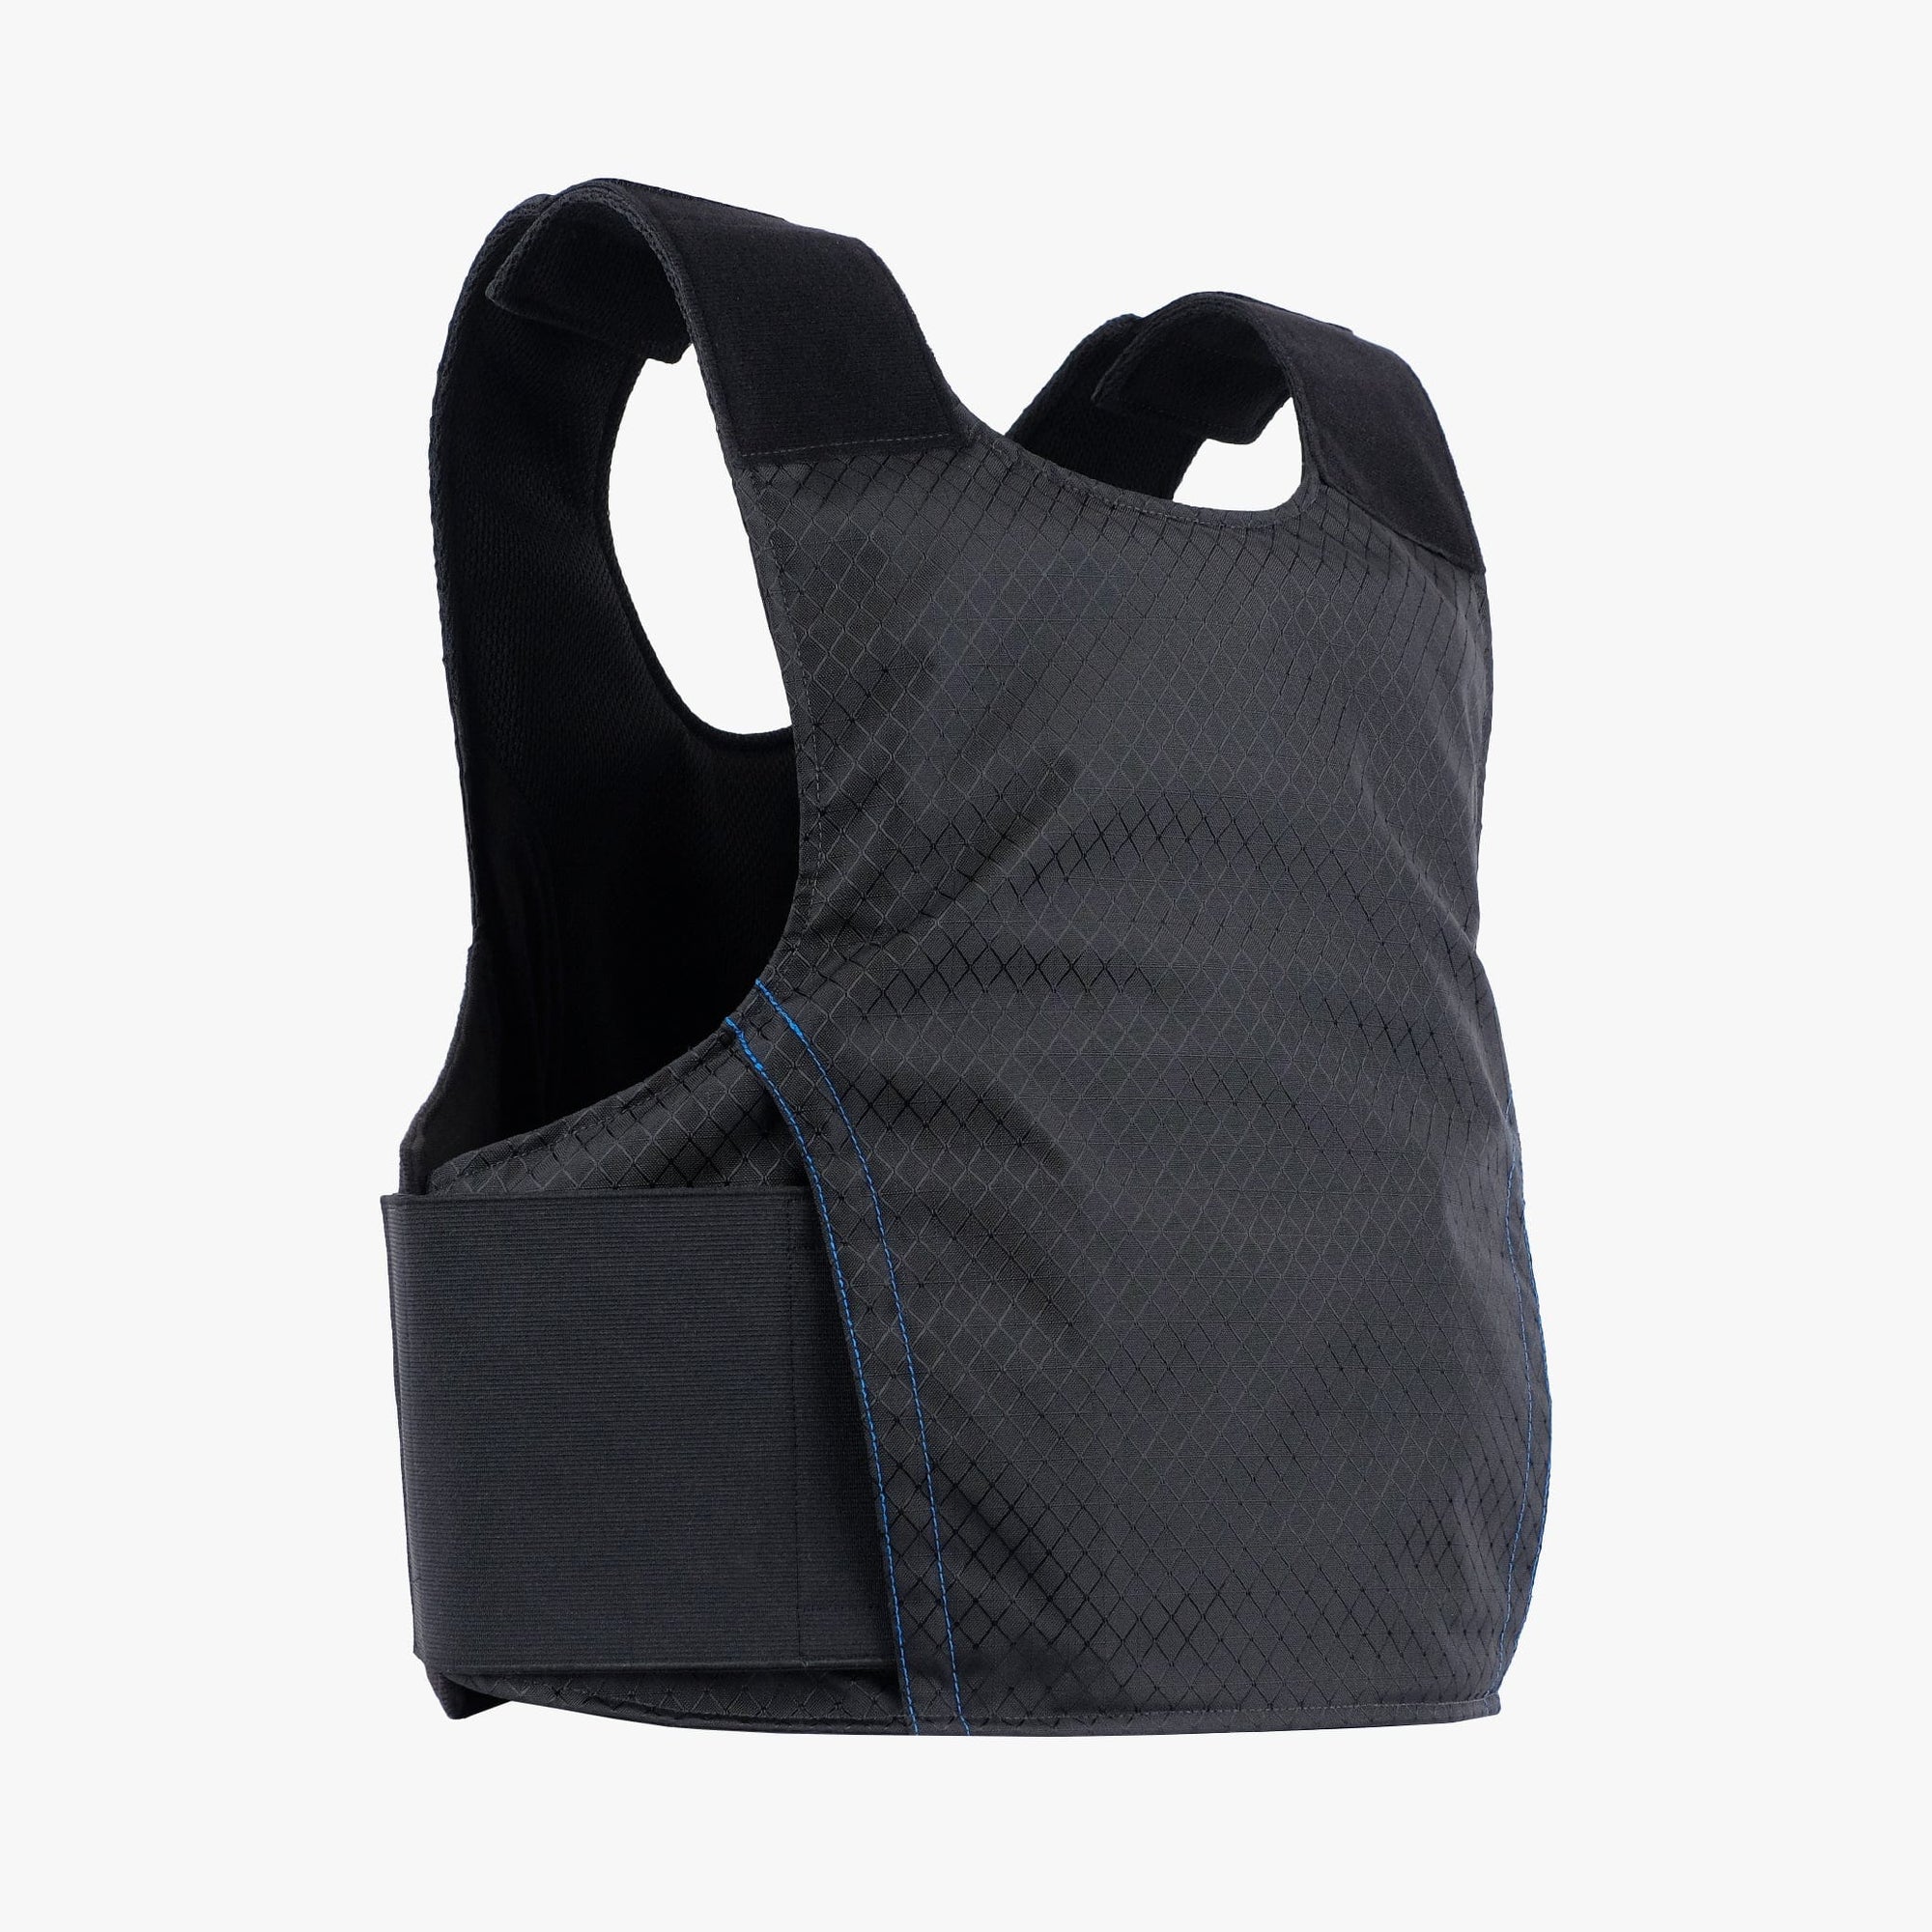 The new Concealable Armor Vest. This 3A soft body armor vest was built for the everyday man. This vest can be used as a concealed body armor vest underneath clothing, or used as an exterior body armor vest. This vest is rugged and comfortable. NIJ Certified Level IIIA body armor vest. 